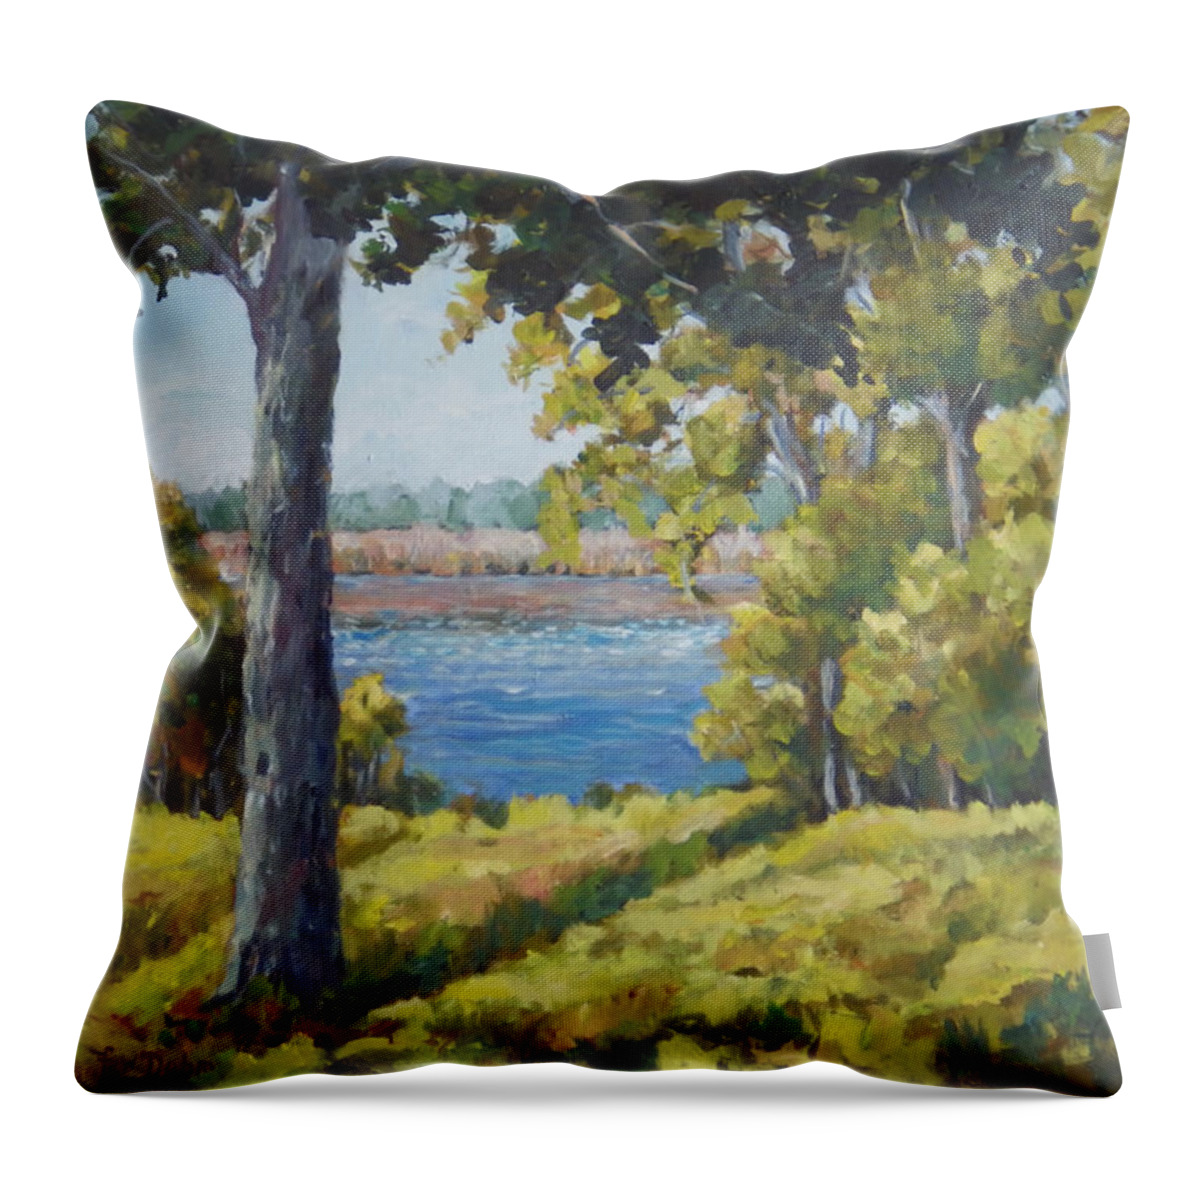 Landscape Throw Pillow featuring the painting Rock Cut State Park by Ingrid Dohm